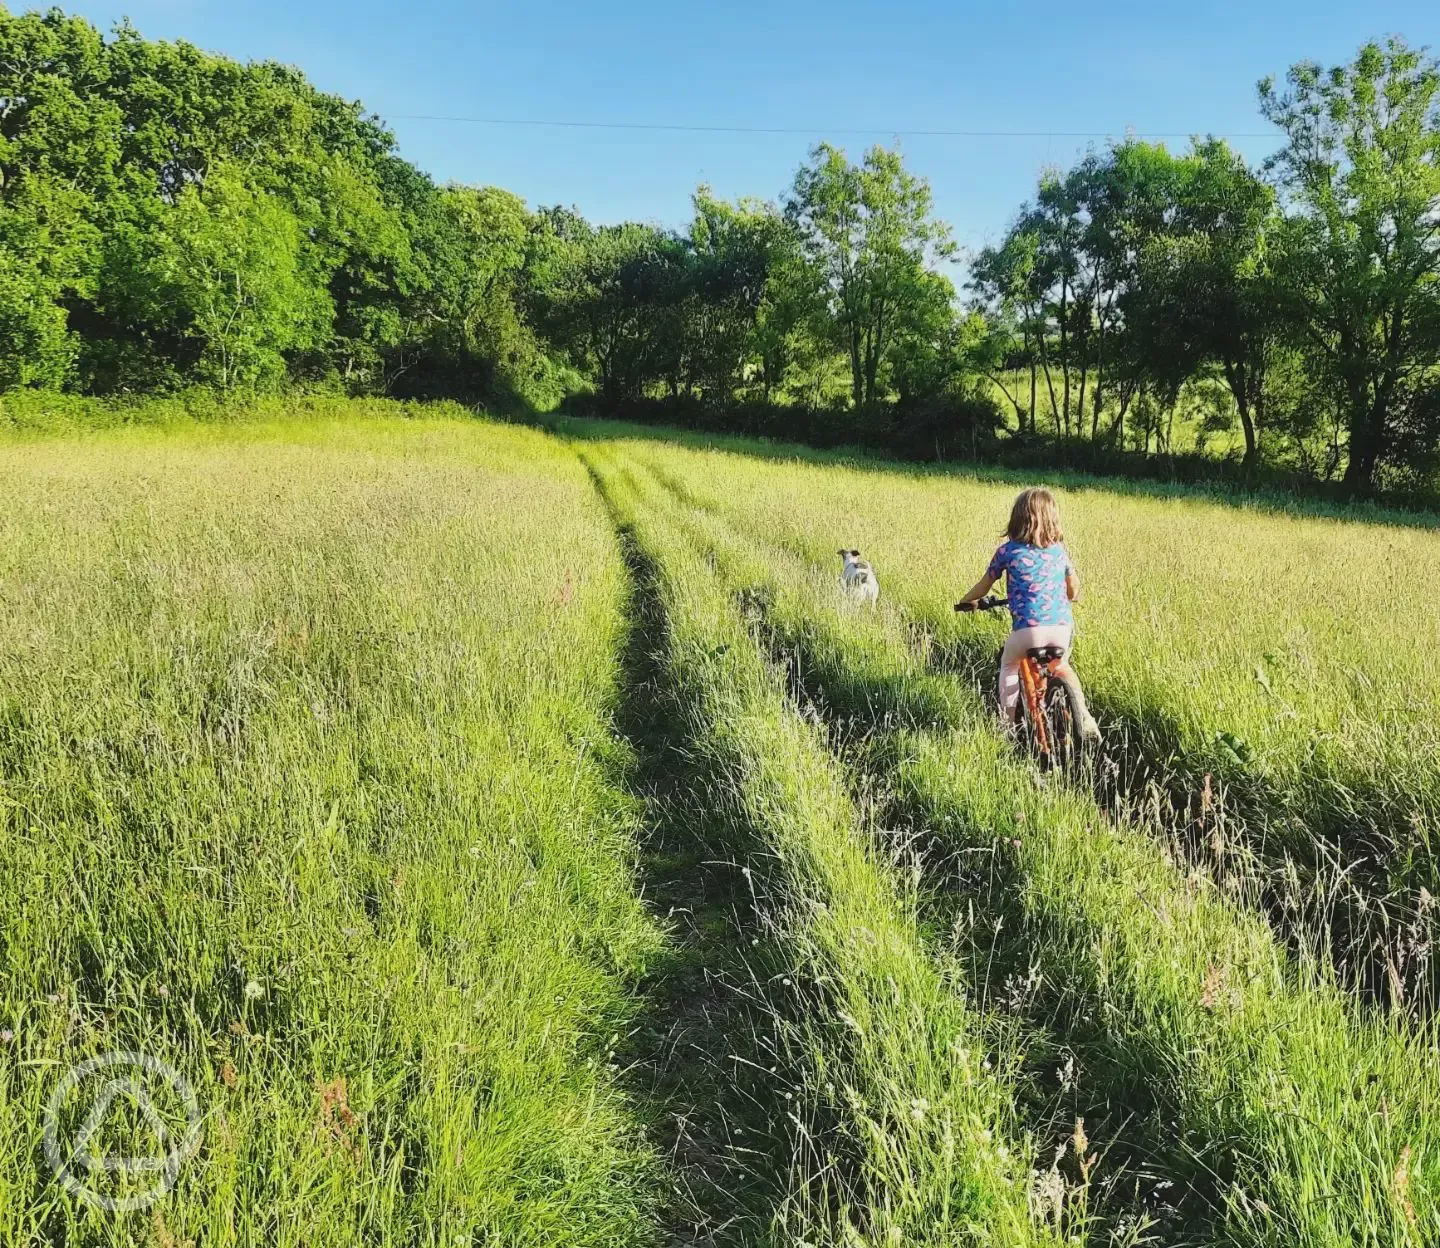 Cycling in the nearby field